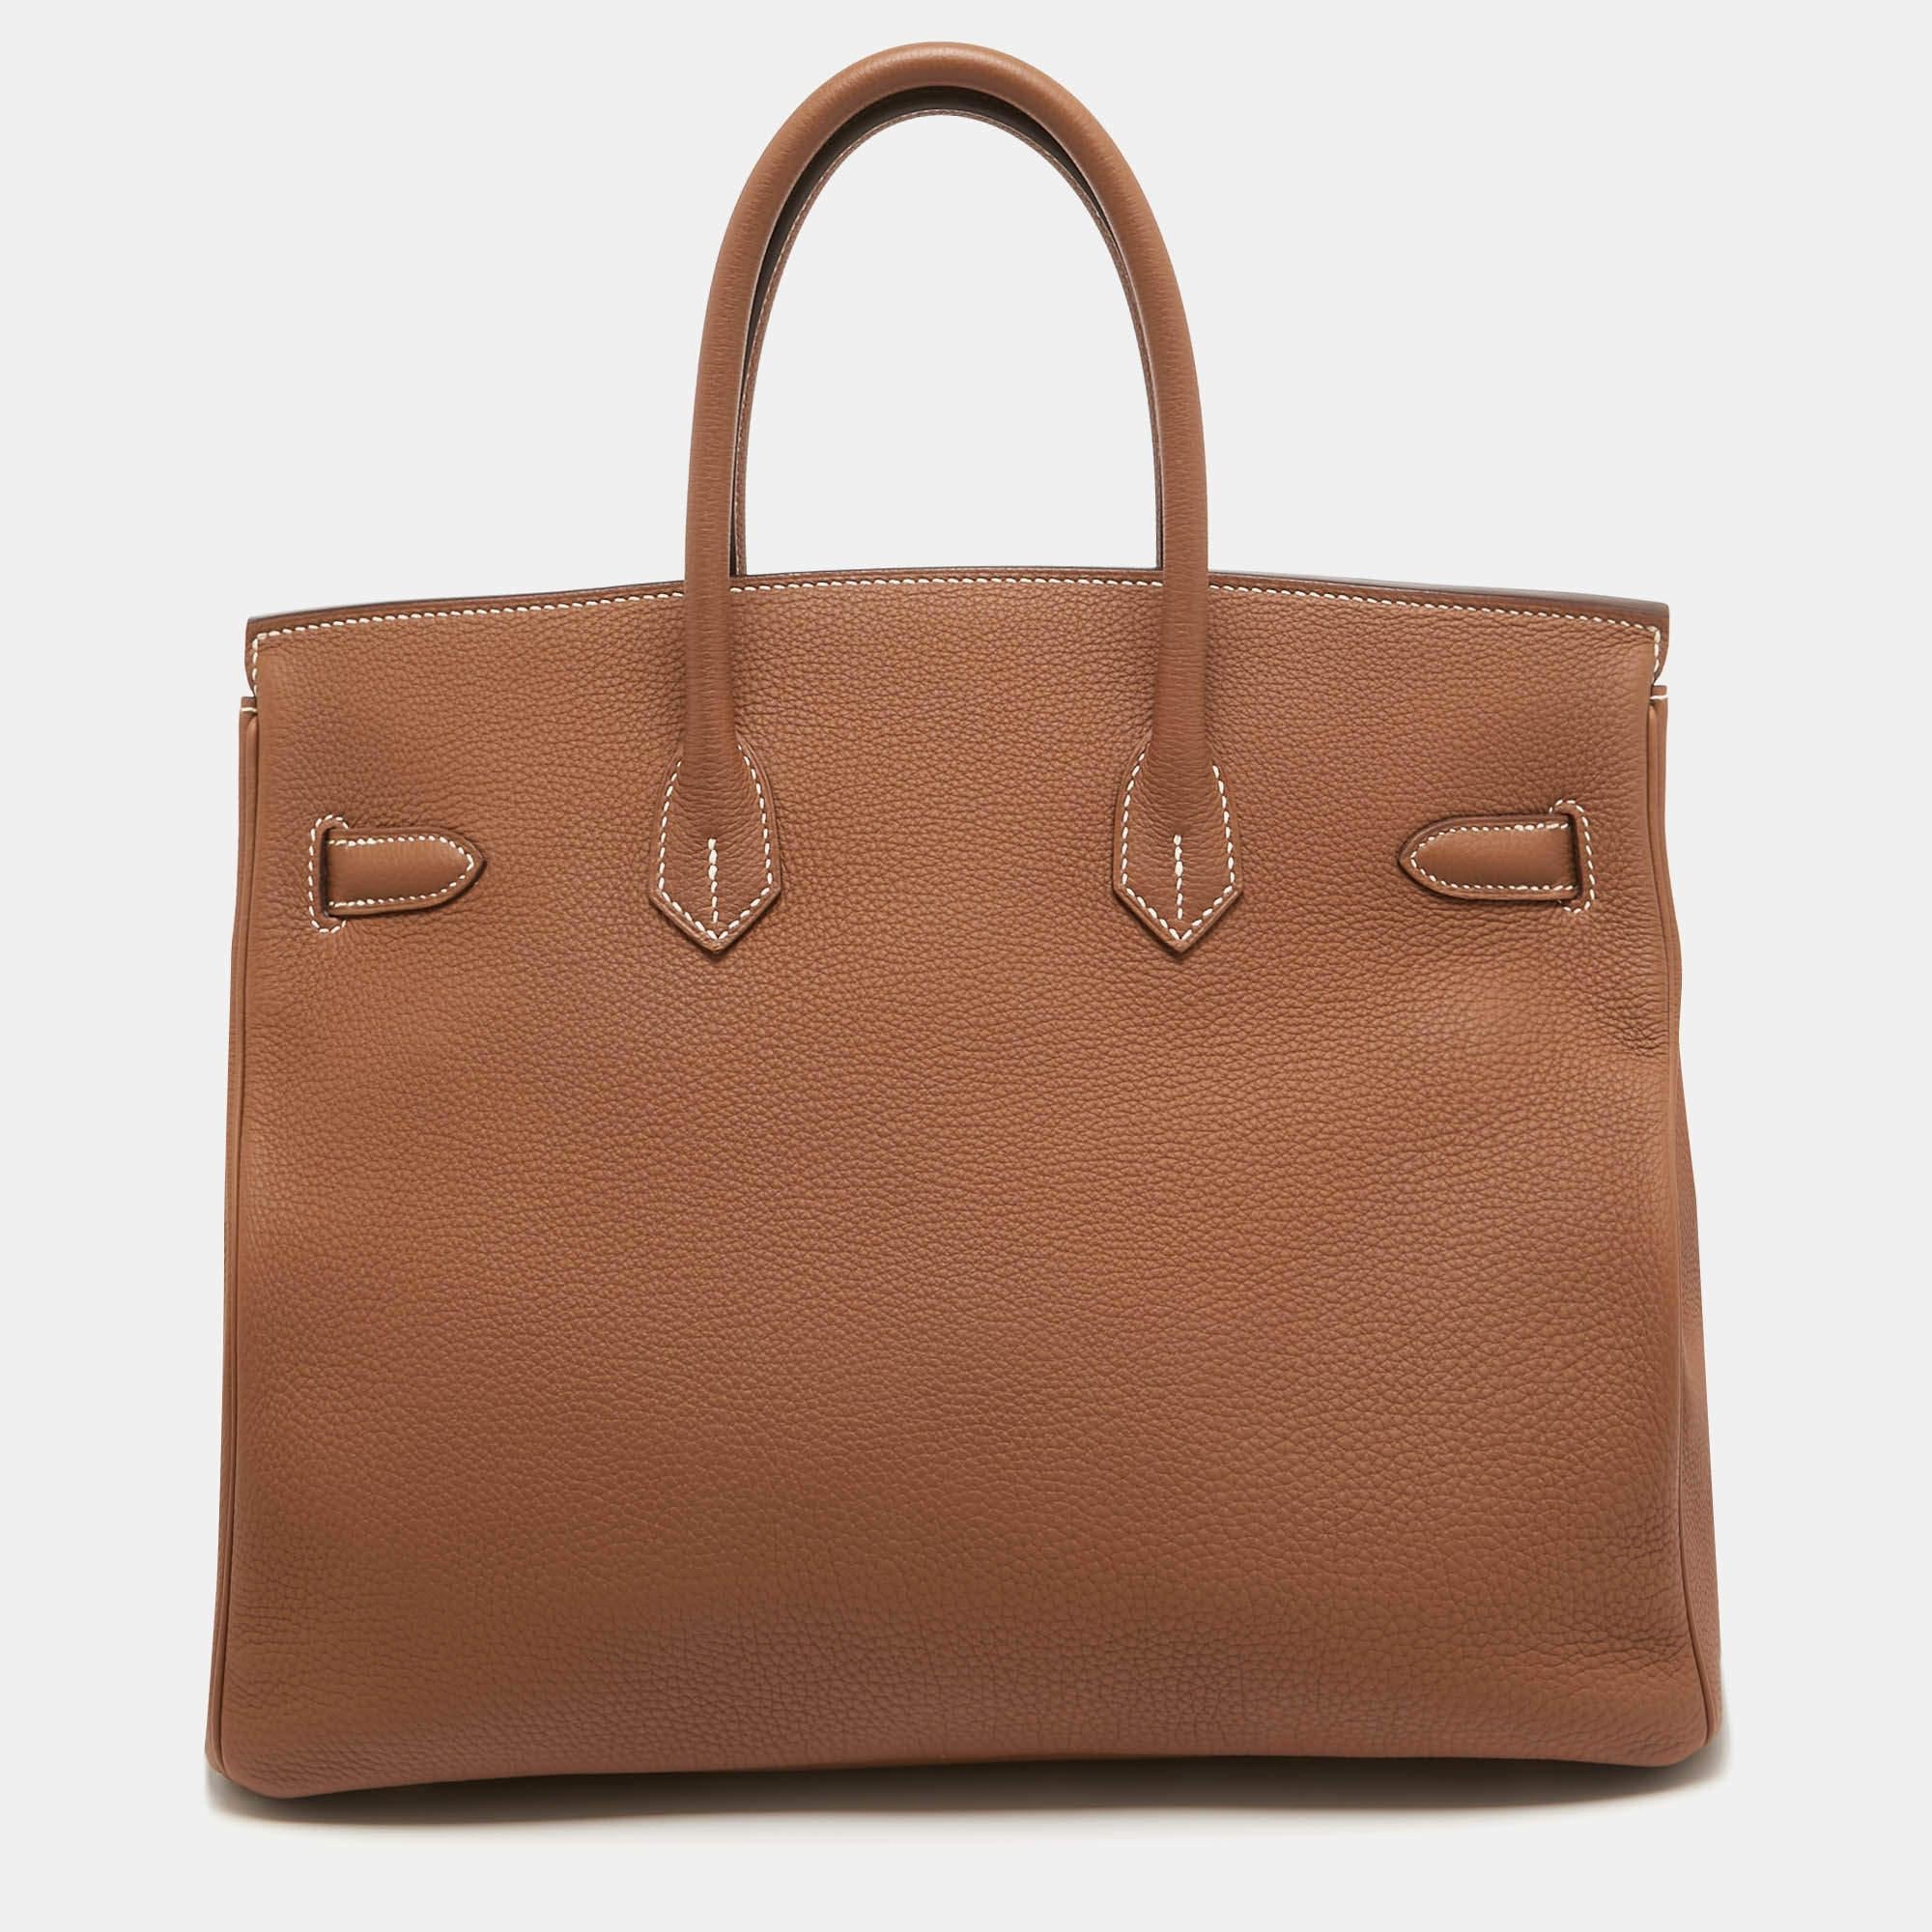 The Hermès Birkin is rightly one of the most desired handbags in the world. Handcrafted from the highest quality leather by skilled artisans, it takes long hours of rigorous effort to stitch a Birkin together. Crafted with expertise, this Birkin 35